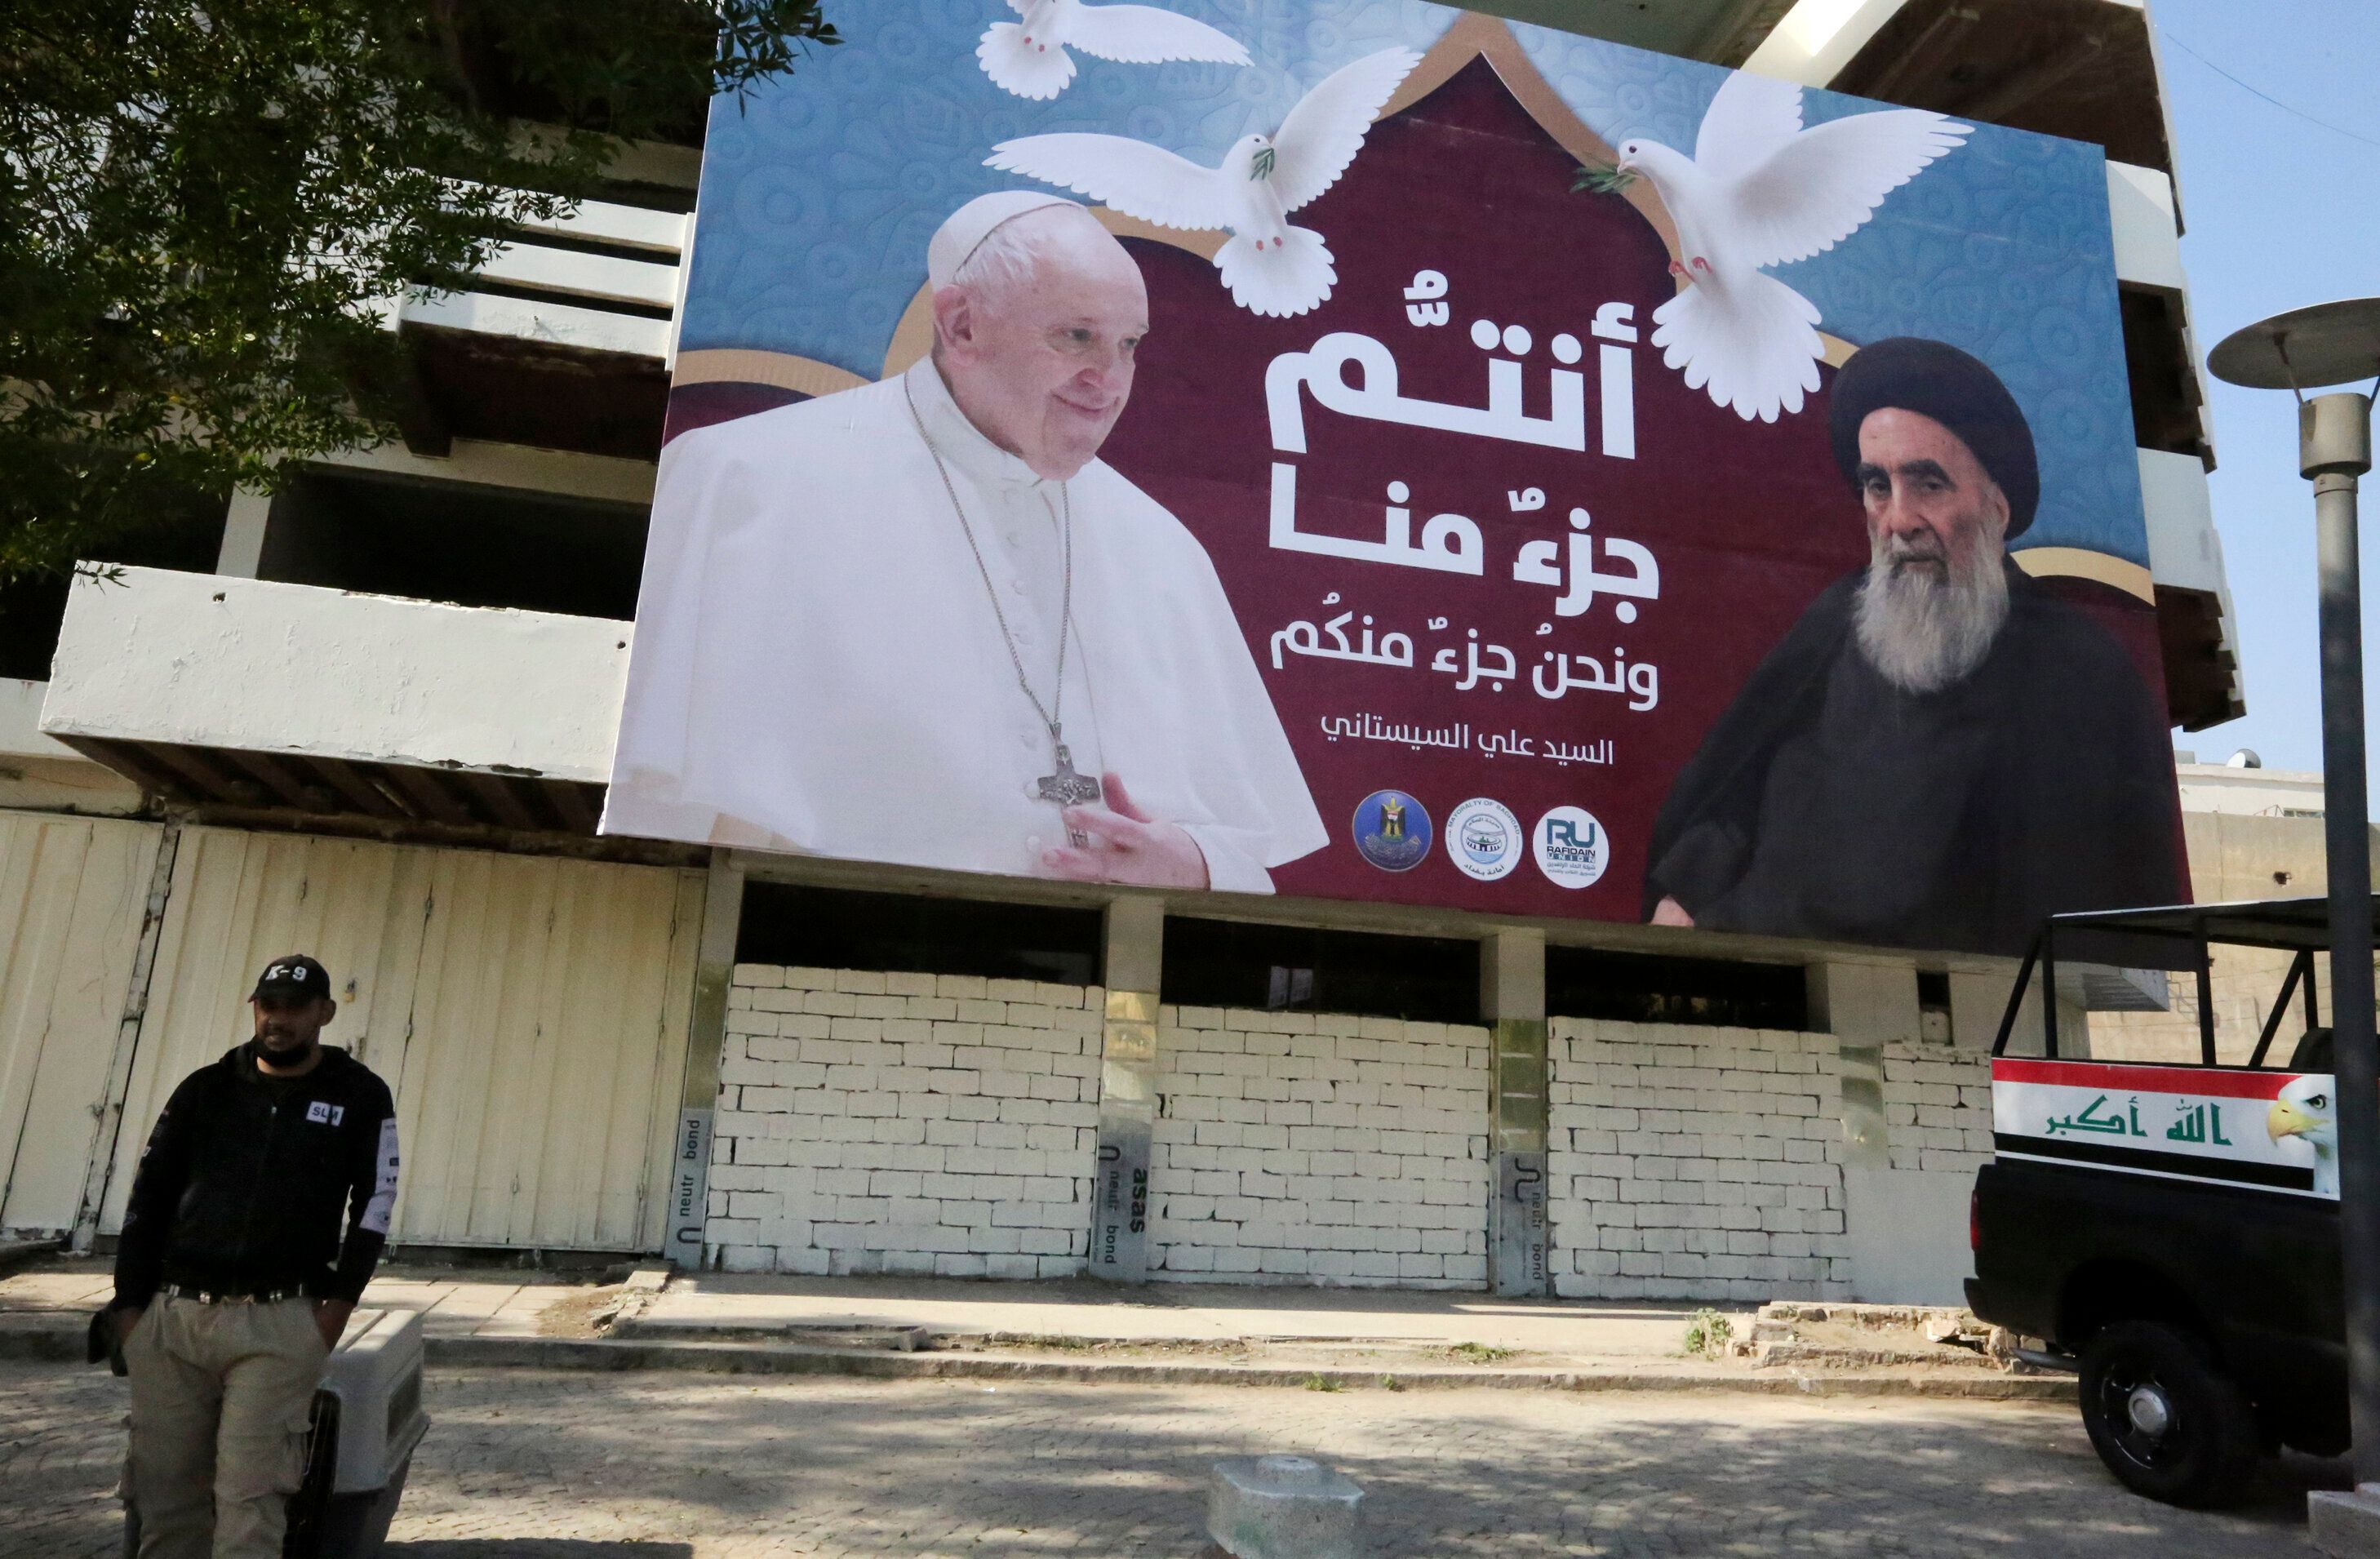 A giant billboard bears portraits of Pope Francis and Grand Ayatollah Ali Sistani in Baghdad on March 3, 2021 ahead of the fi